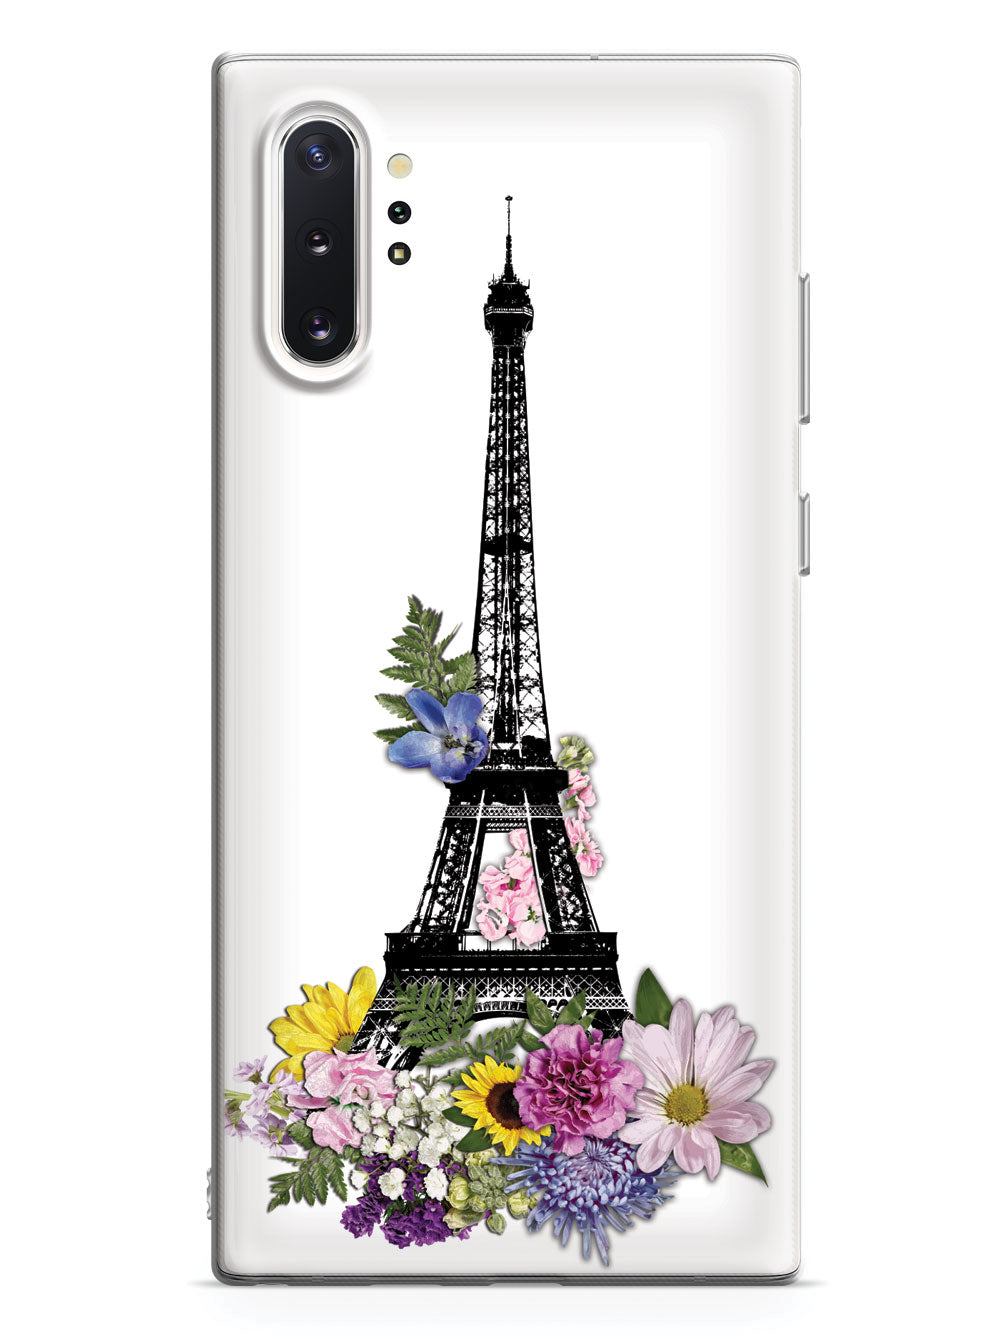 Eiffel Tower Drawing and Flowers - White Case